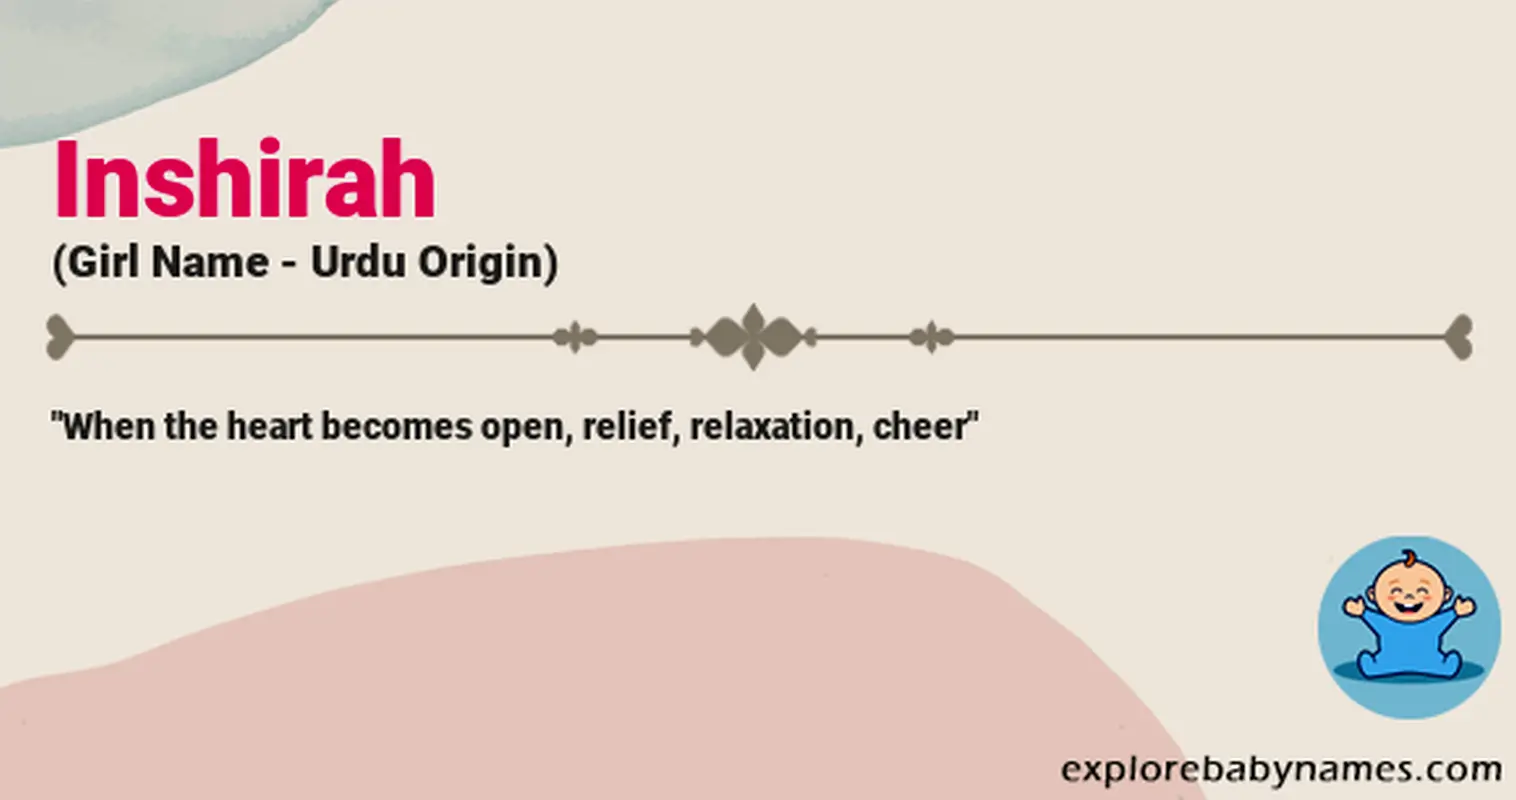 Meaning of Inshirah